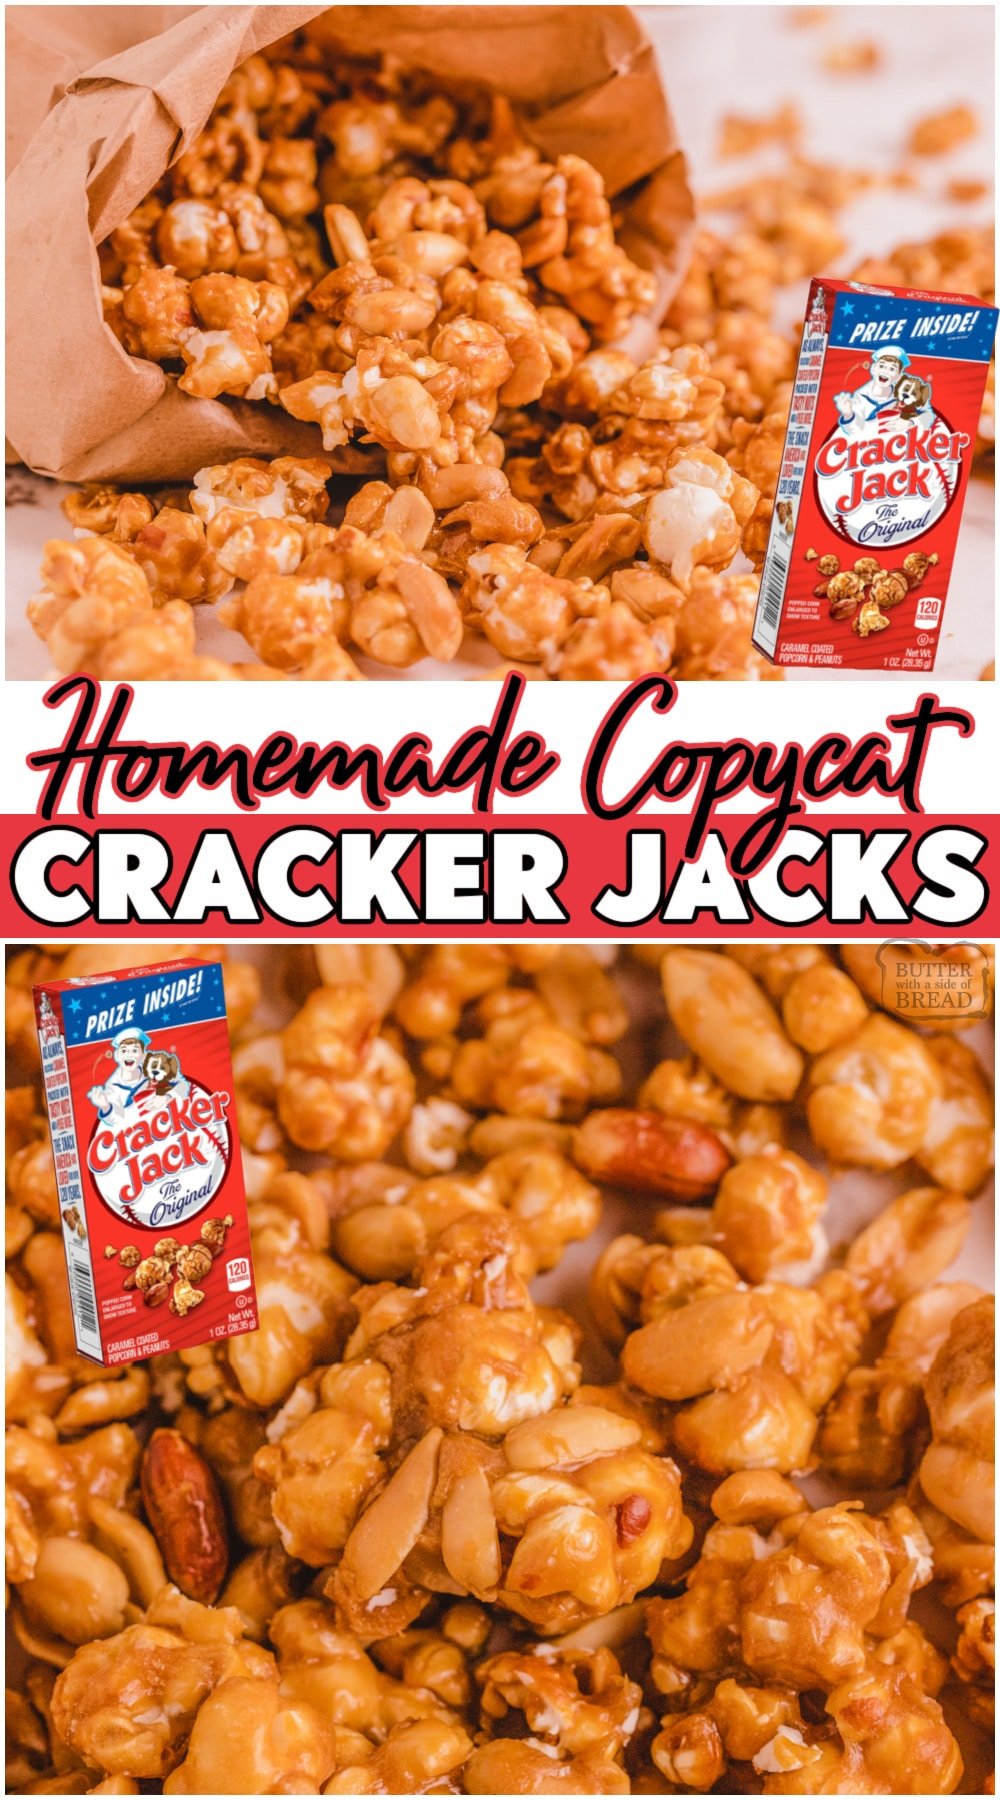 Copycat Cracker Jacks made with popcorn, butter, brown sugar & vanilla! Sweet caramel coated popcorn and peanut mix that's easily made at home! #popcorn #caramel #peanuts #CrackerJacks #easyrecipe from BUTTER WITH A SIDE OF BREAD